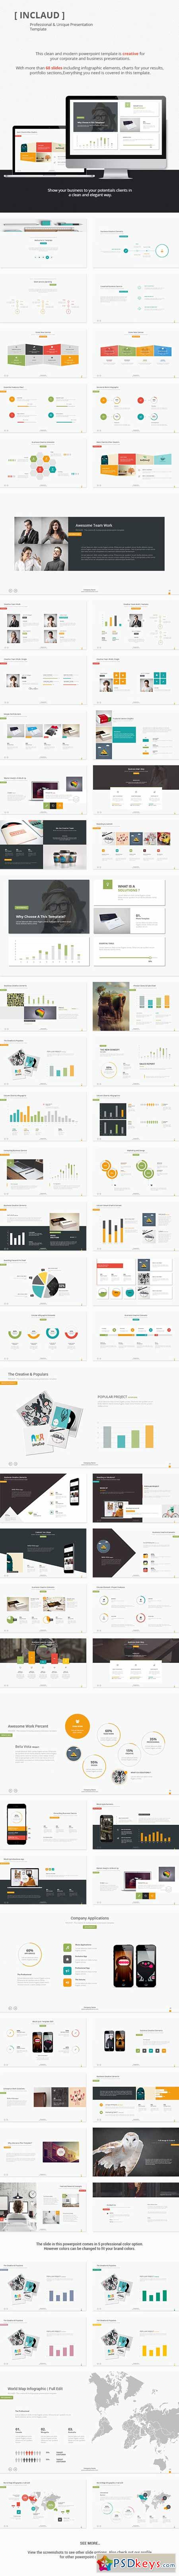 Claude - Clean & Professional Template 10137105